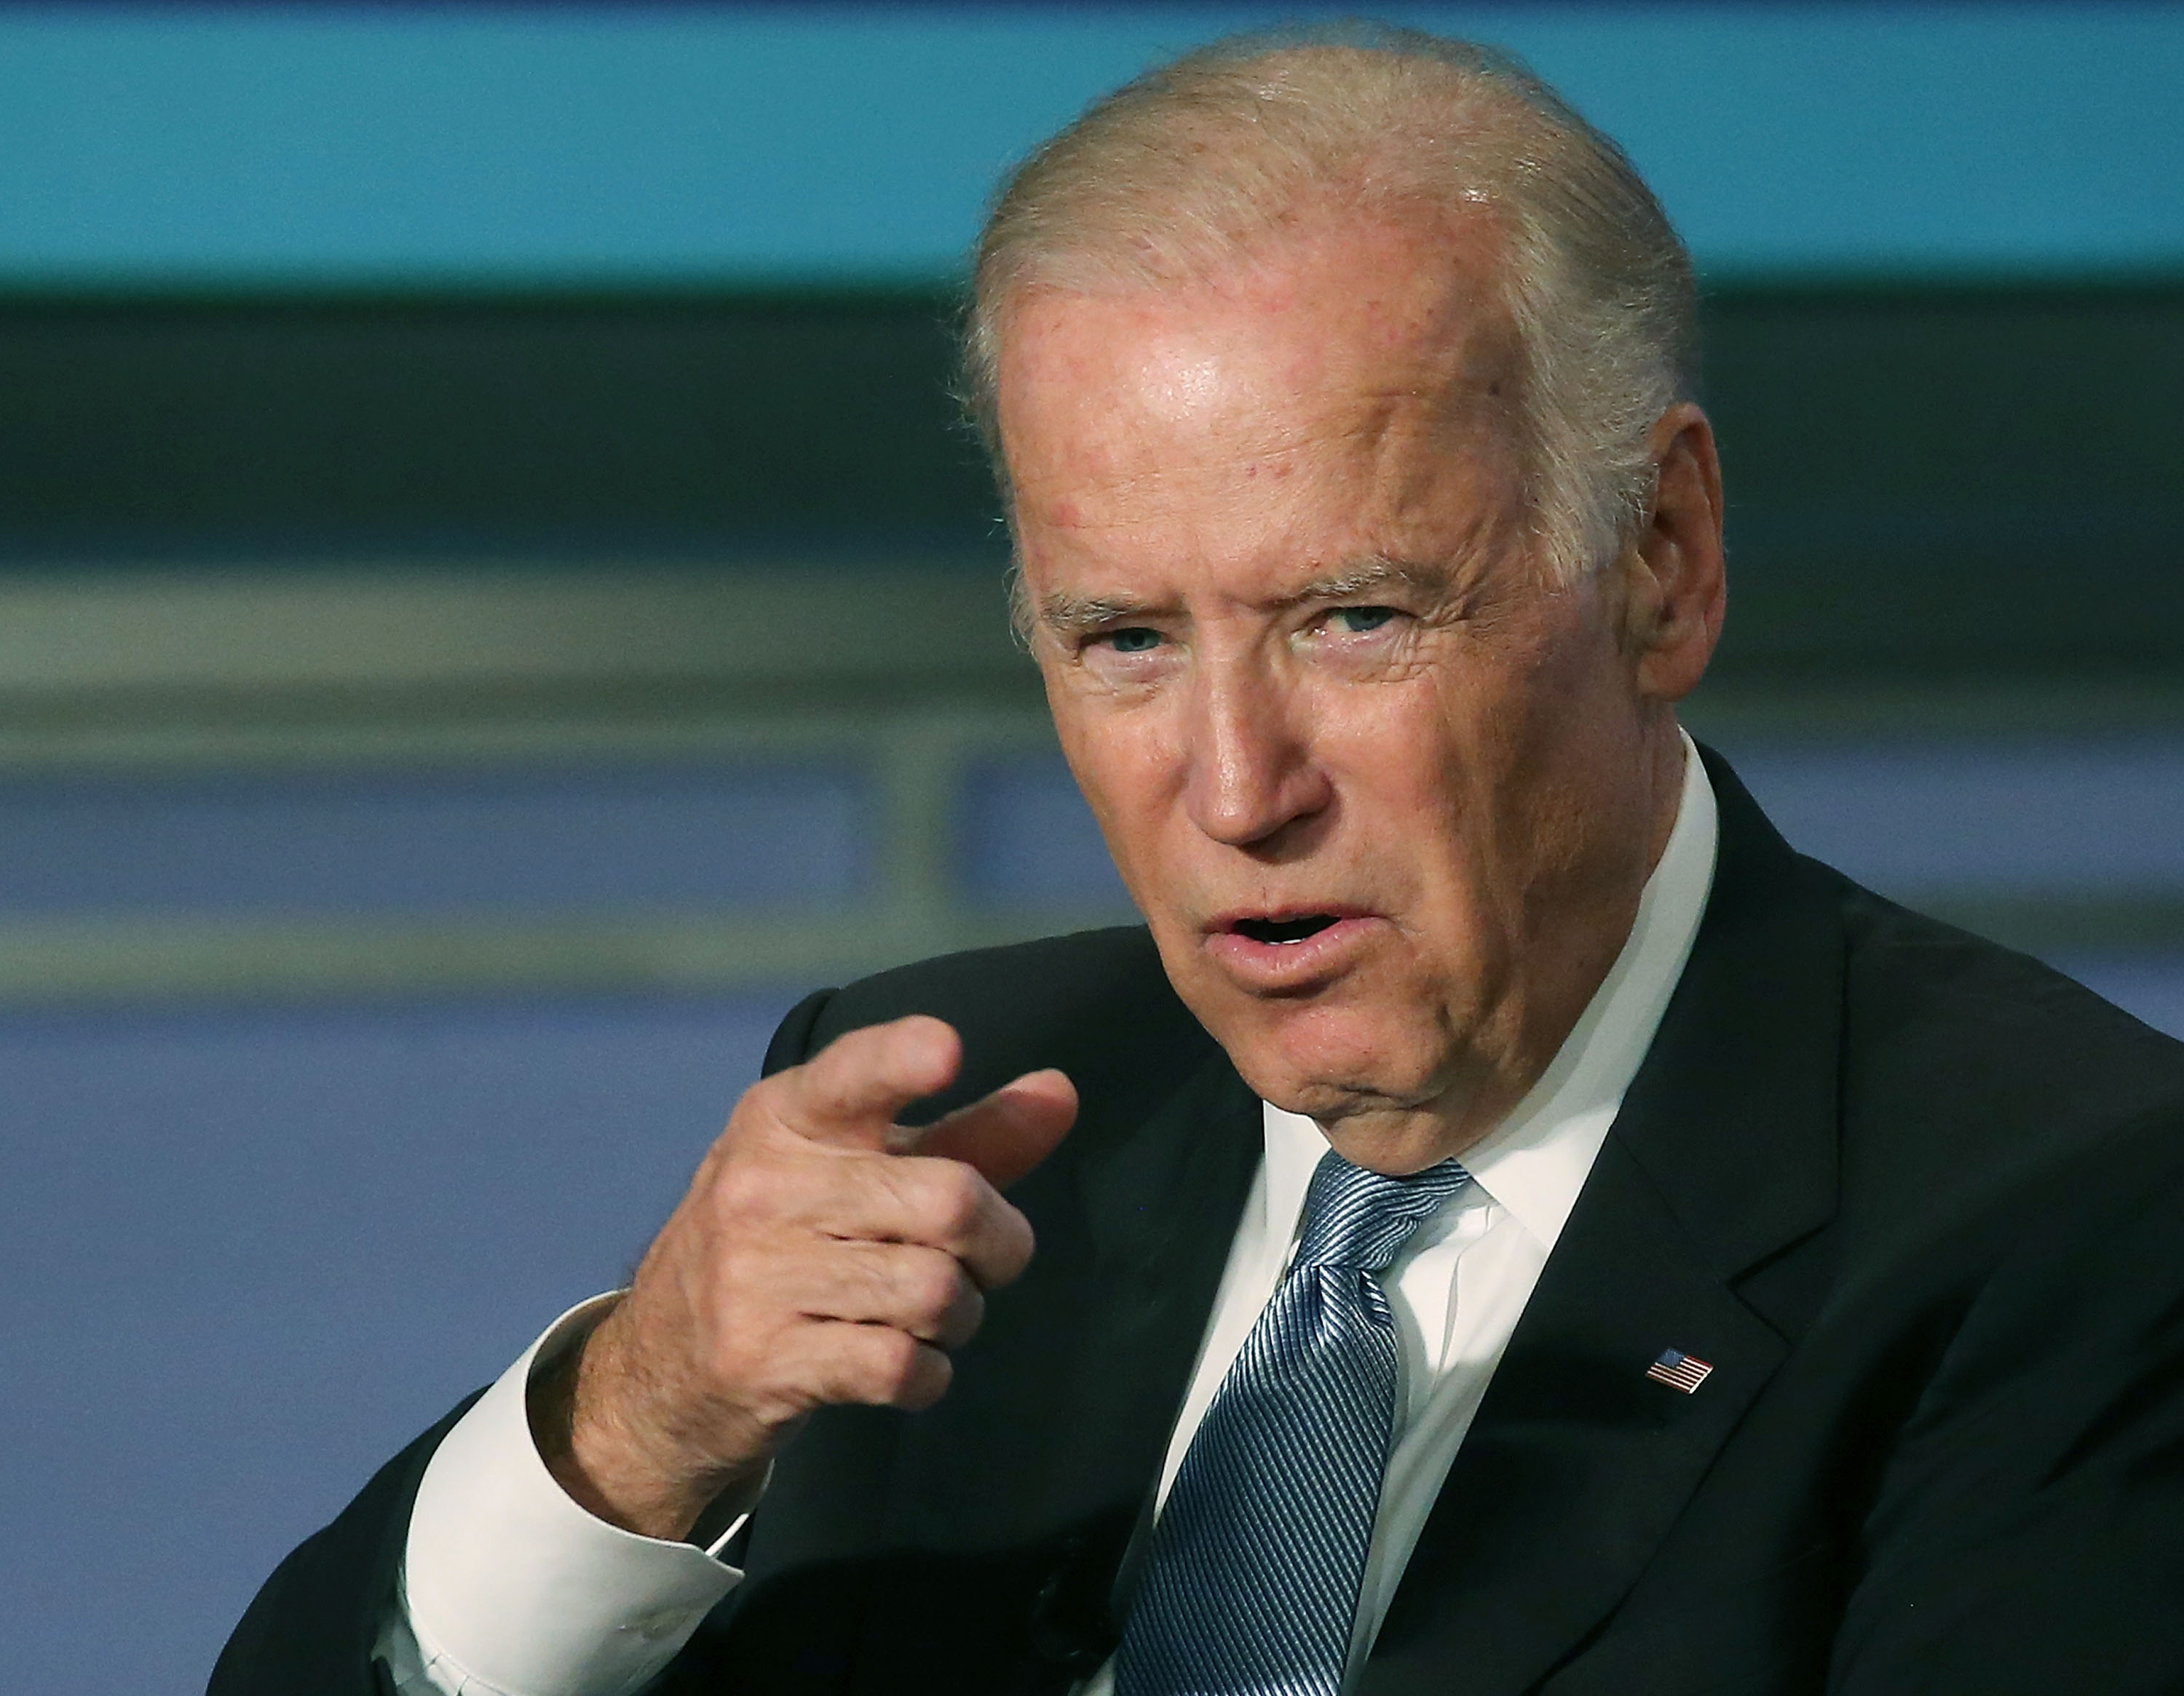 Joe Biden’s Net Worth 5 Fast Facts You Need to Know